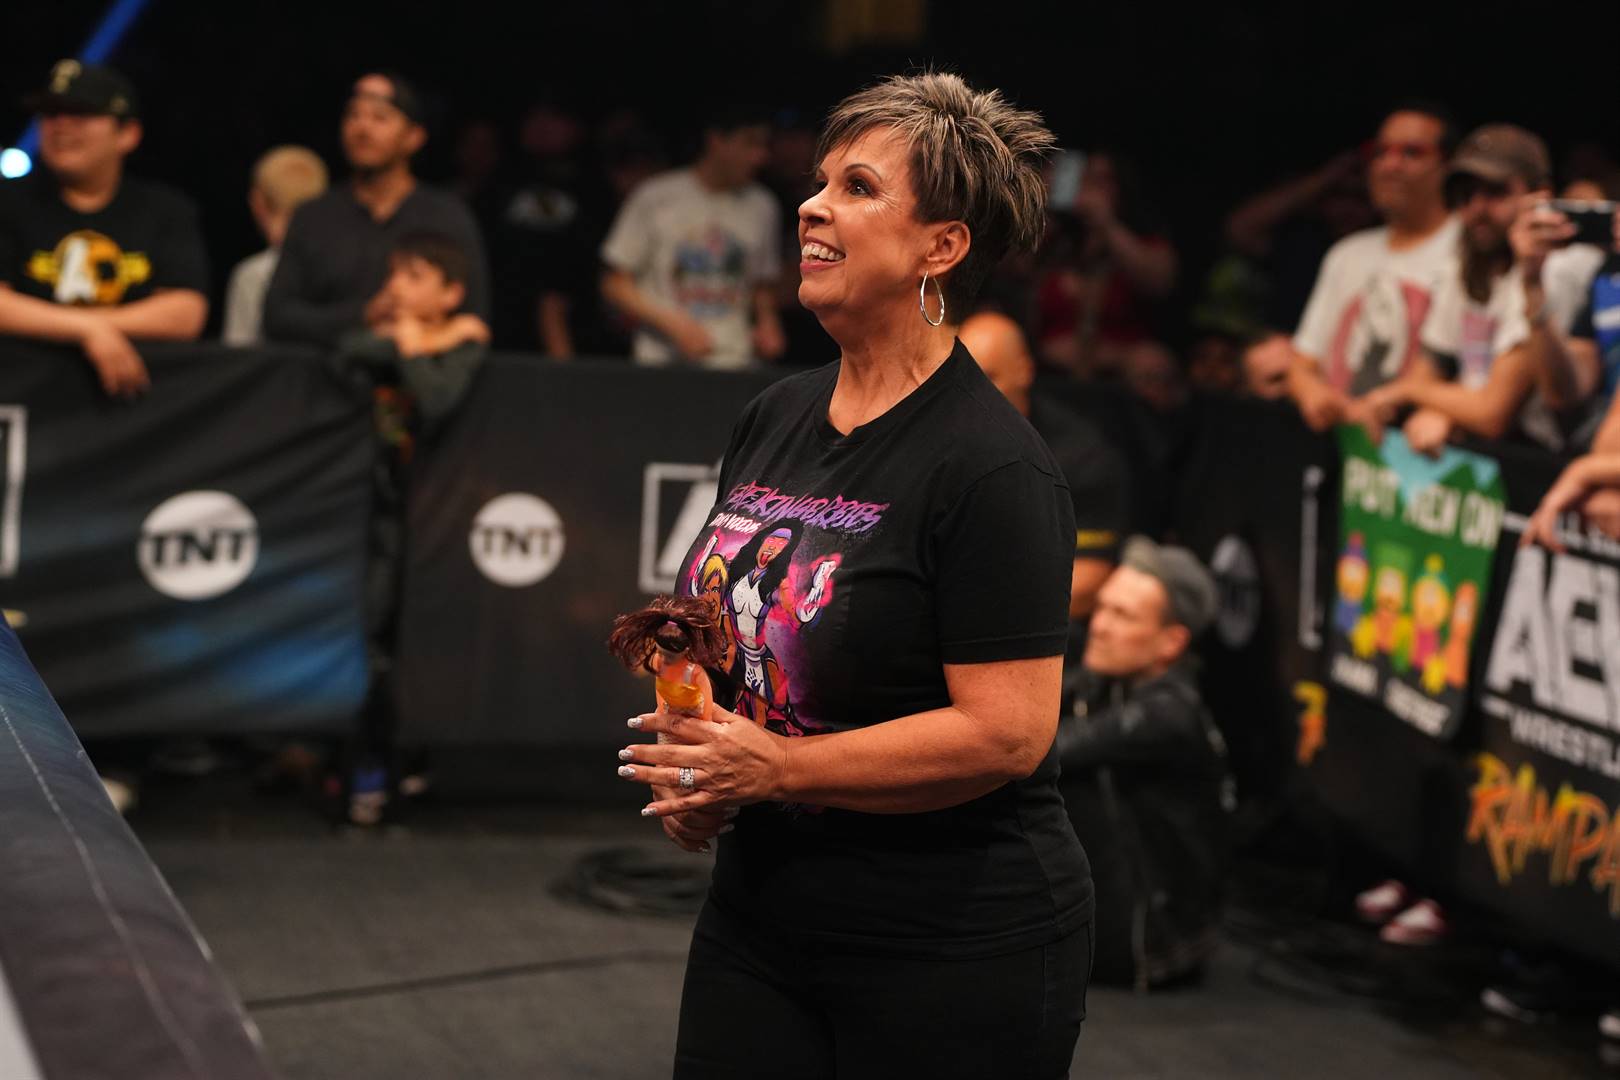 Vickie Guerrero is actually a sweet soul away from the ring. Photo: Supplied